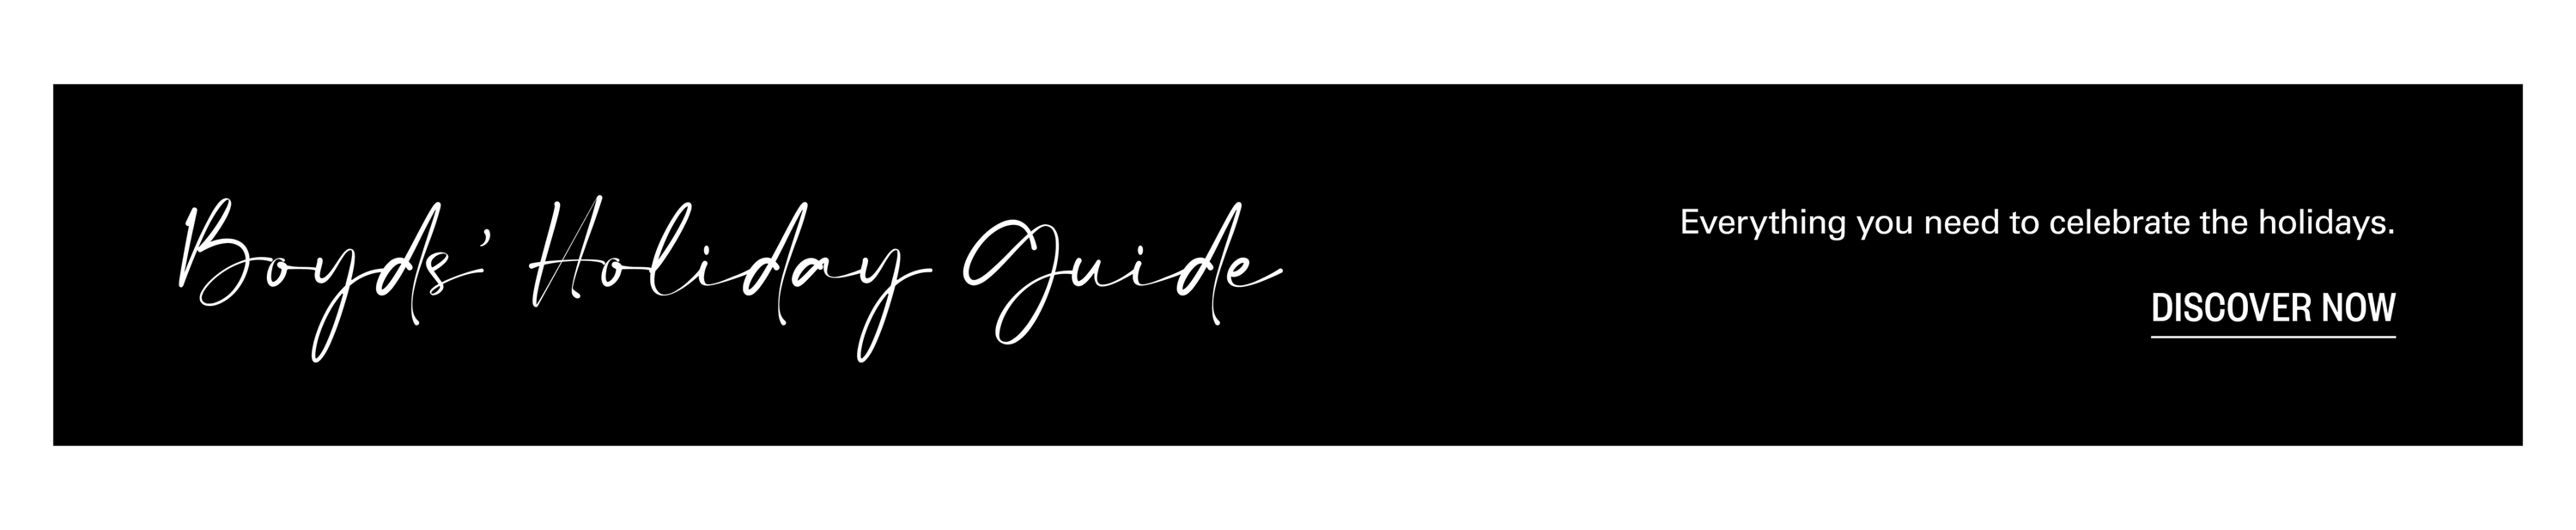 Boyds Holiday Guide 